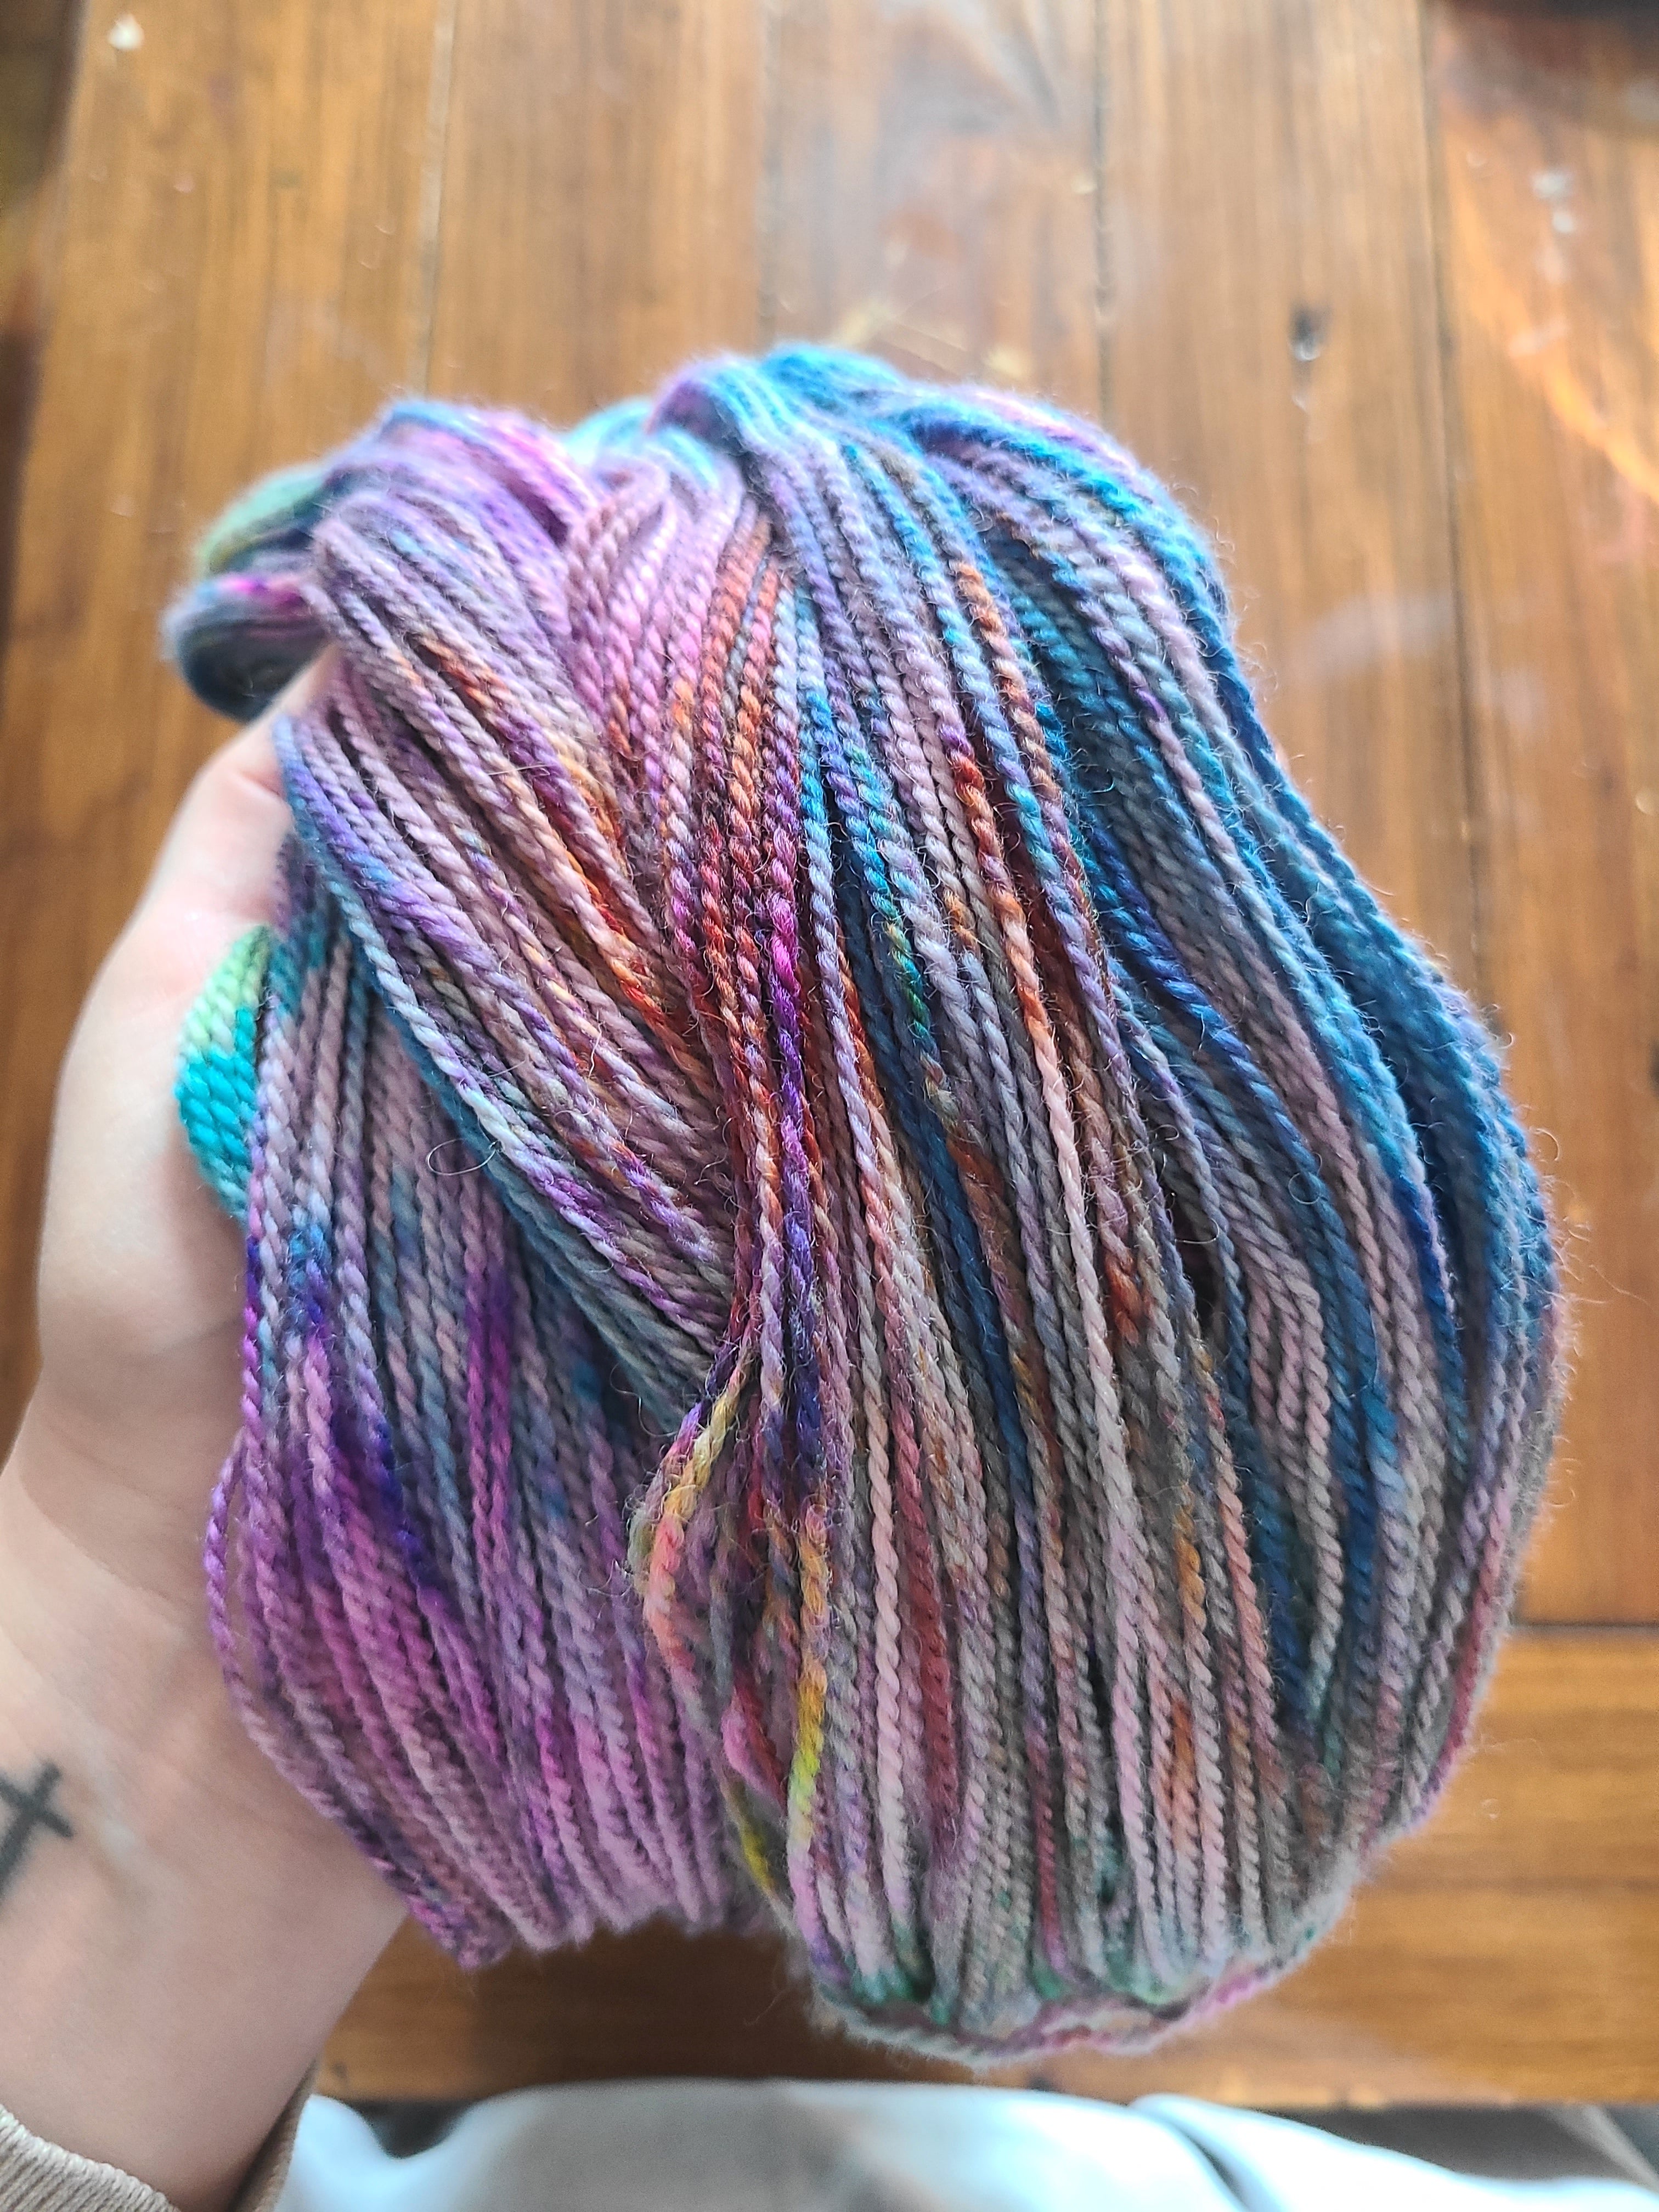 Hatchimal - 100% BFL Fingering Weight 2ply